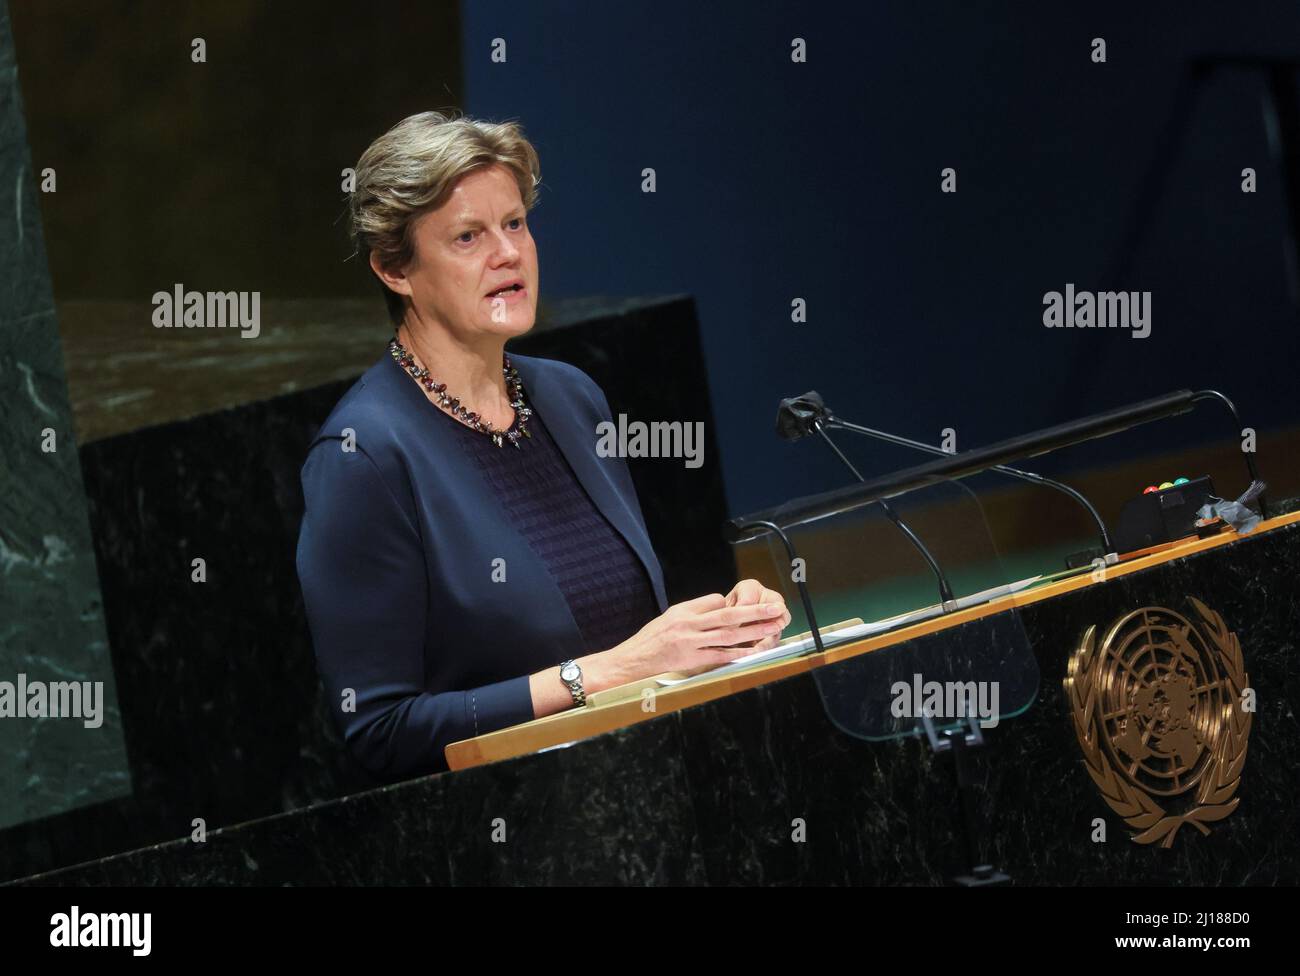 United Kingdom's Ambassador to the U.N. Barbara Woodward addresses a special session of the U.N. General Assembly on Russia's invasion of Ukraine, at the United Nations Headquarters in New York, U.S., March 23, 2022. REUTERS/Brendan McDermid Stock Photo